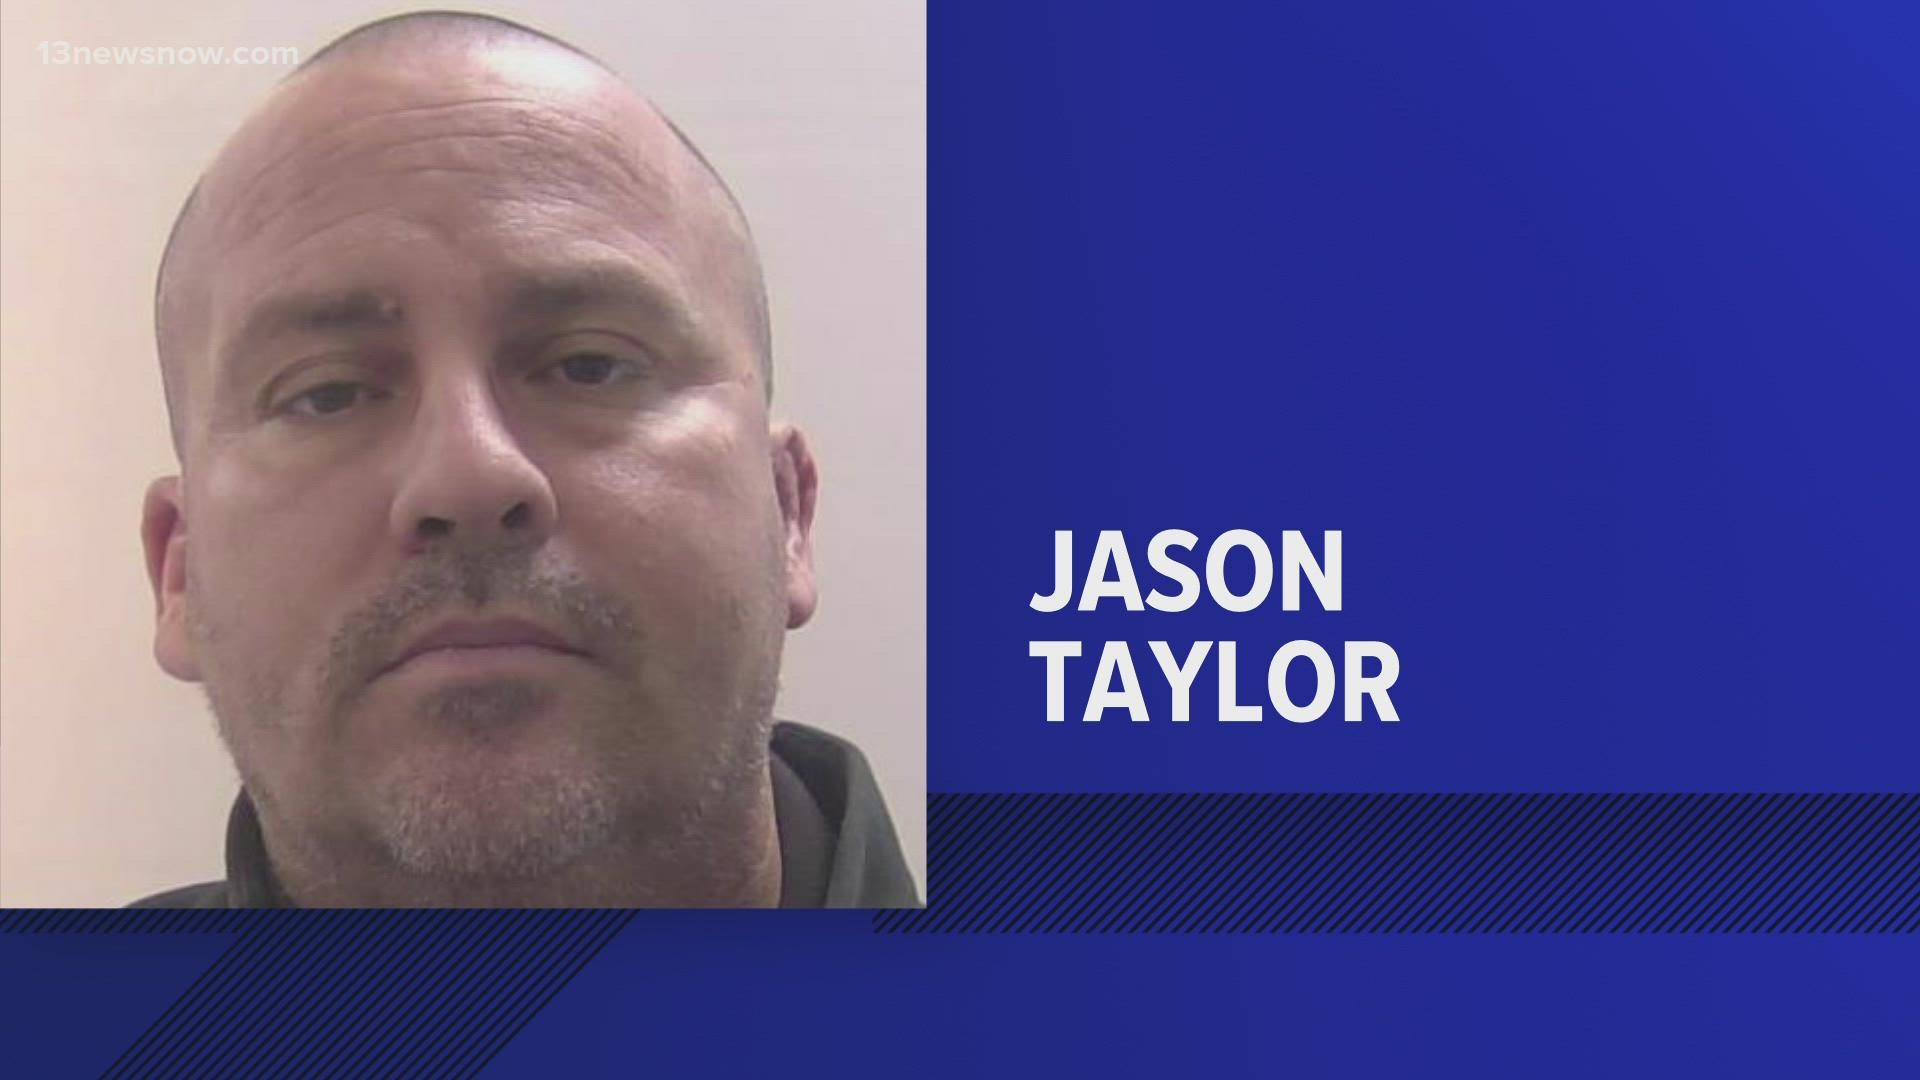 According to arrest records, Warwick High School Assistant Principal Jason Taylor faces 13 felony charges in Chesapeake, including one count of rape.